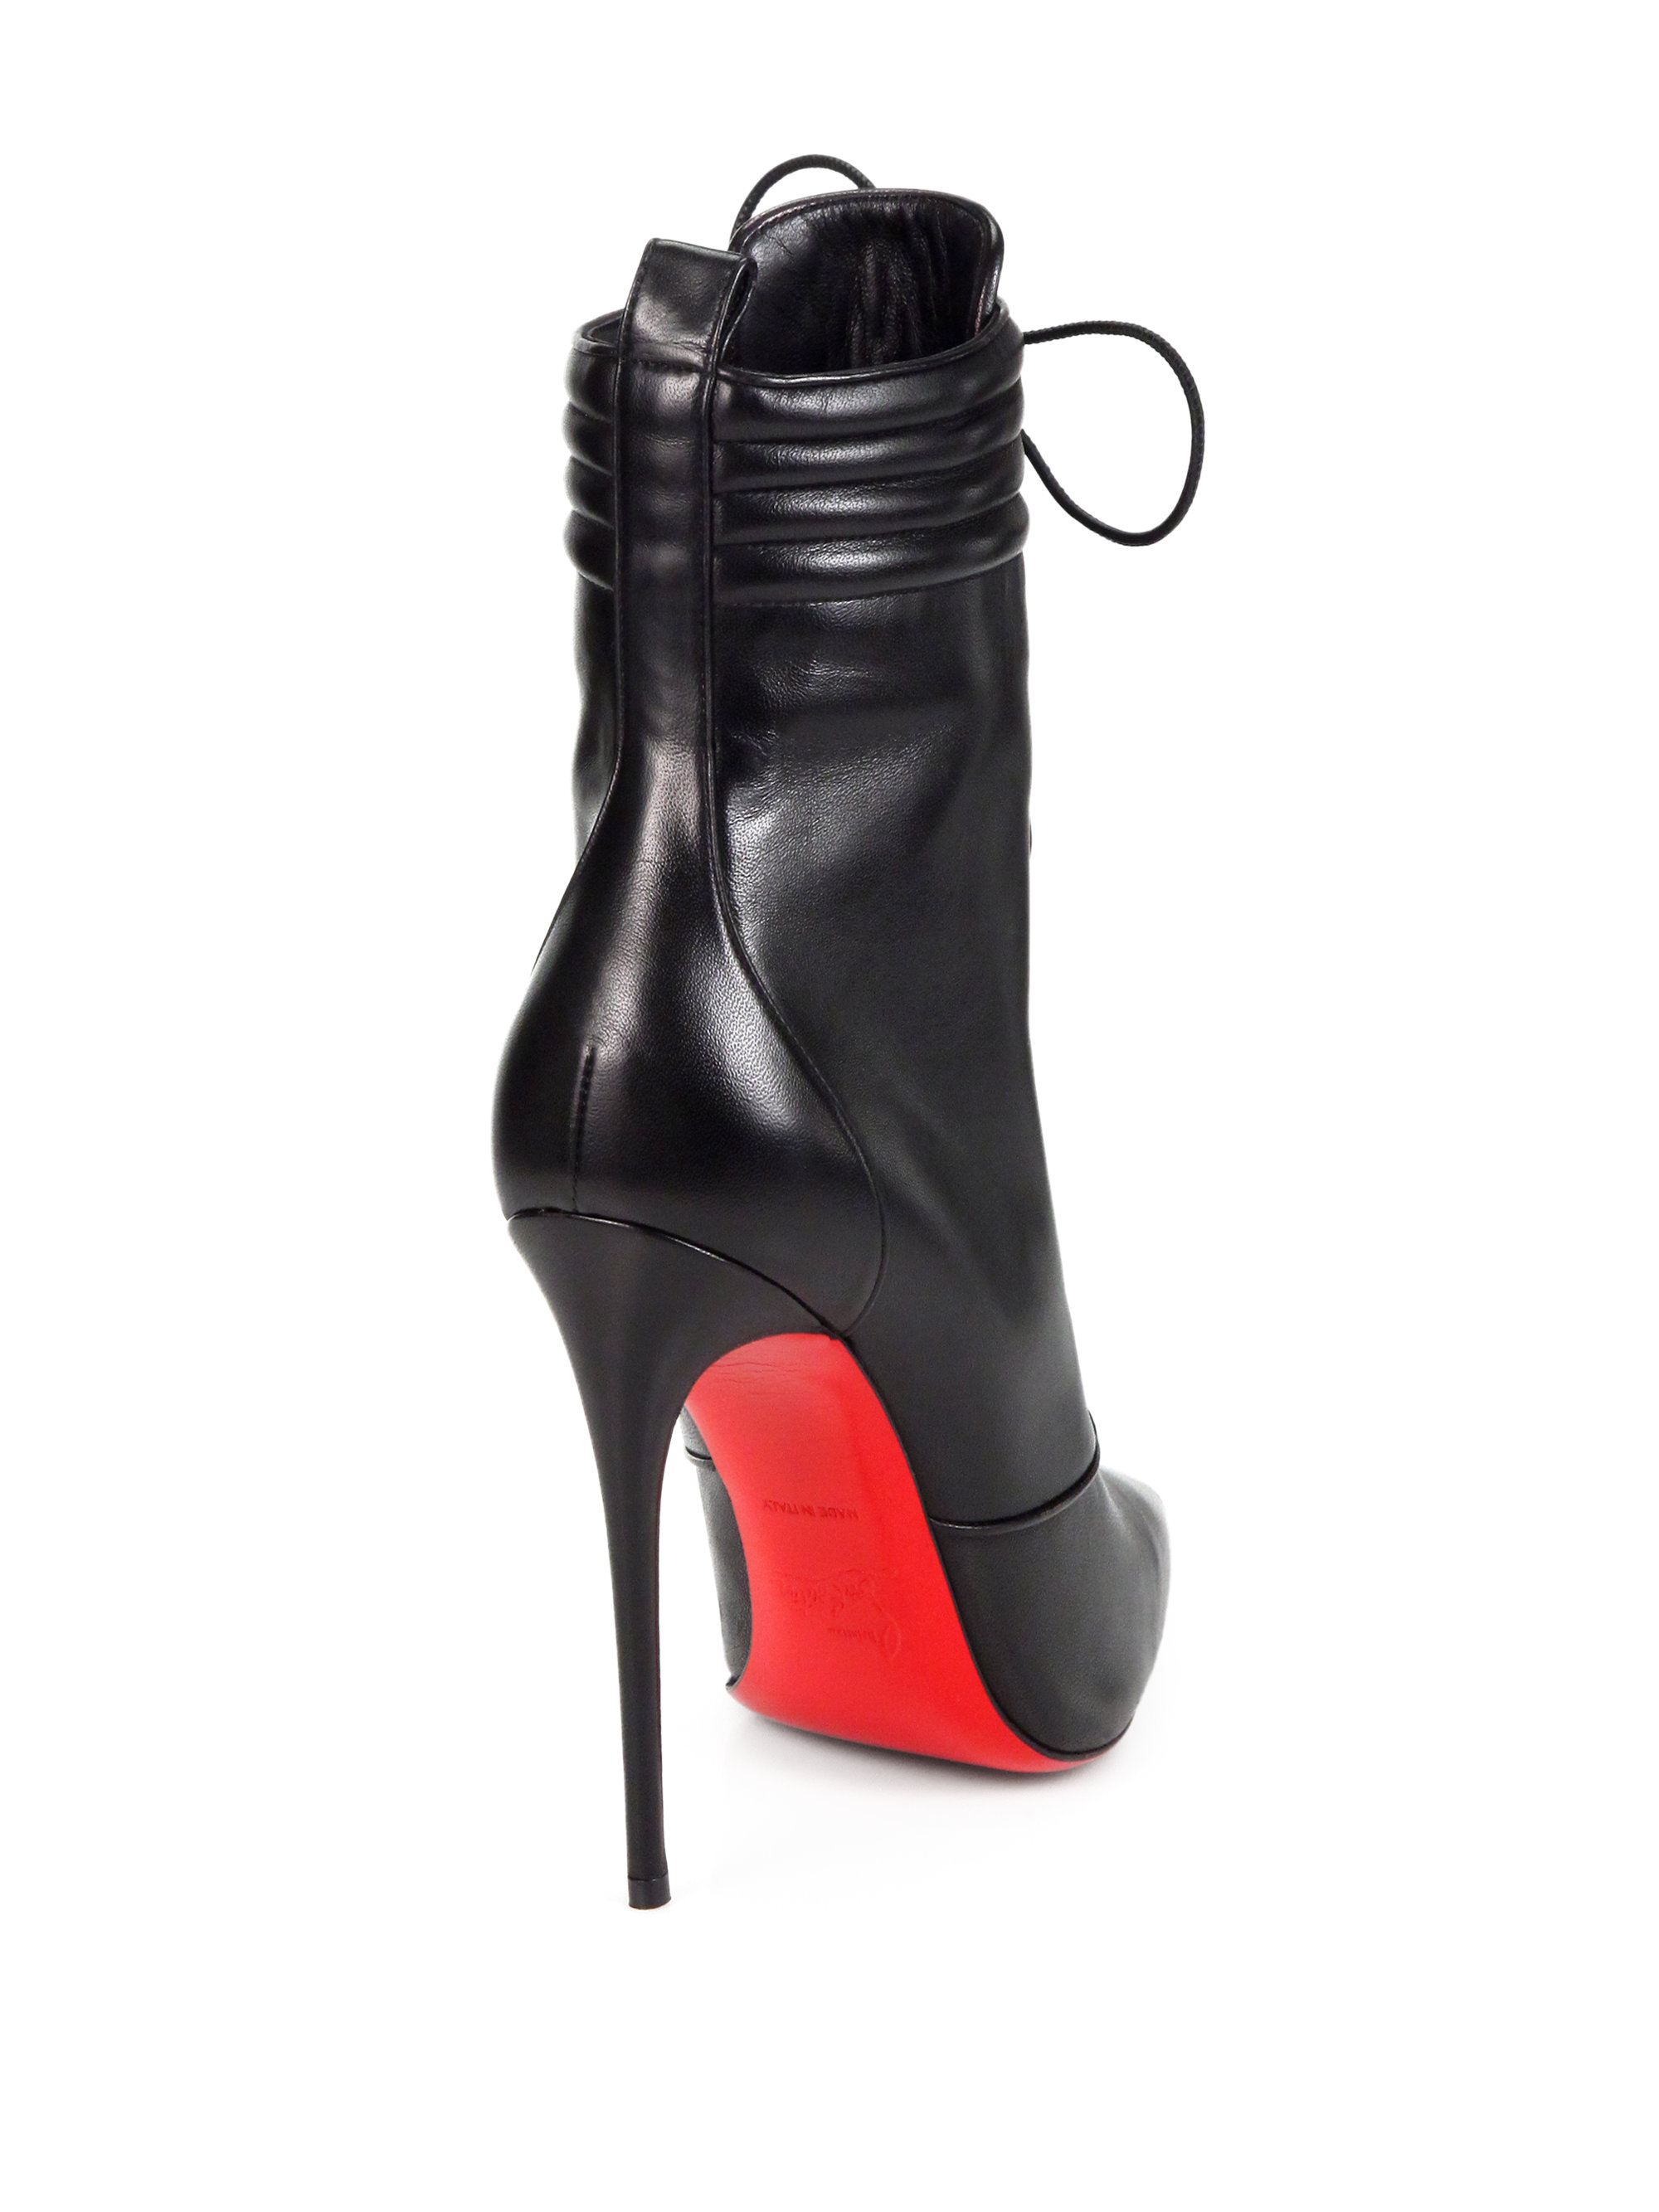 Christian louboutin Mado Leather Lace up Ankle Boots in Black | Lyst